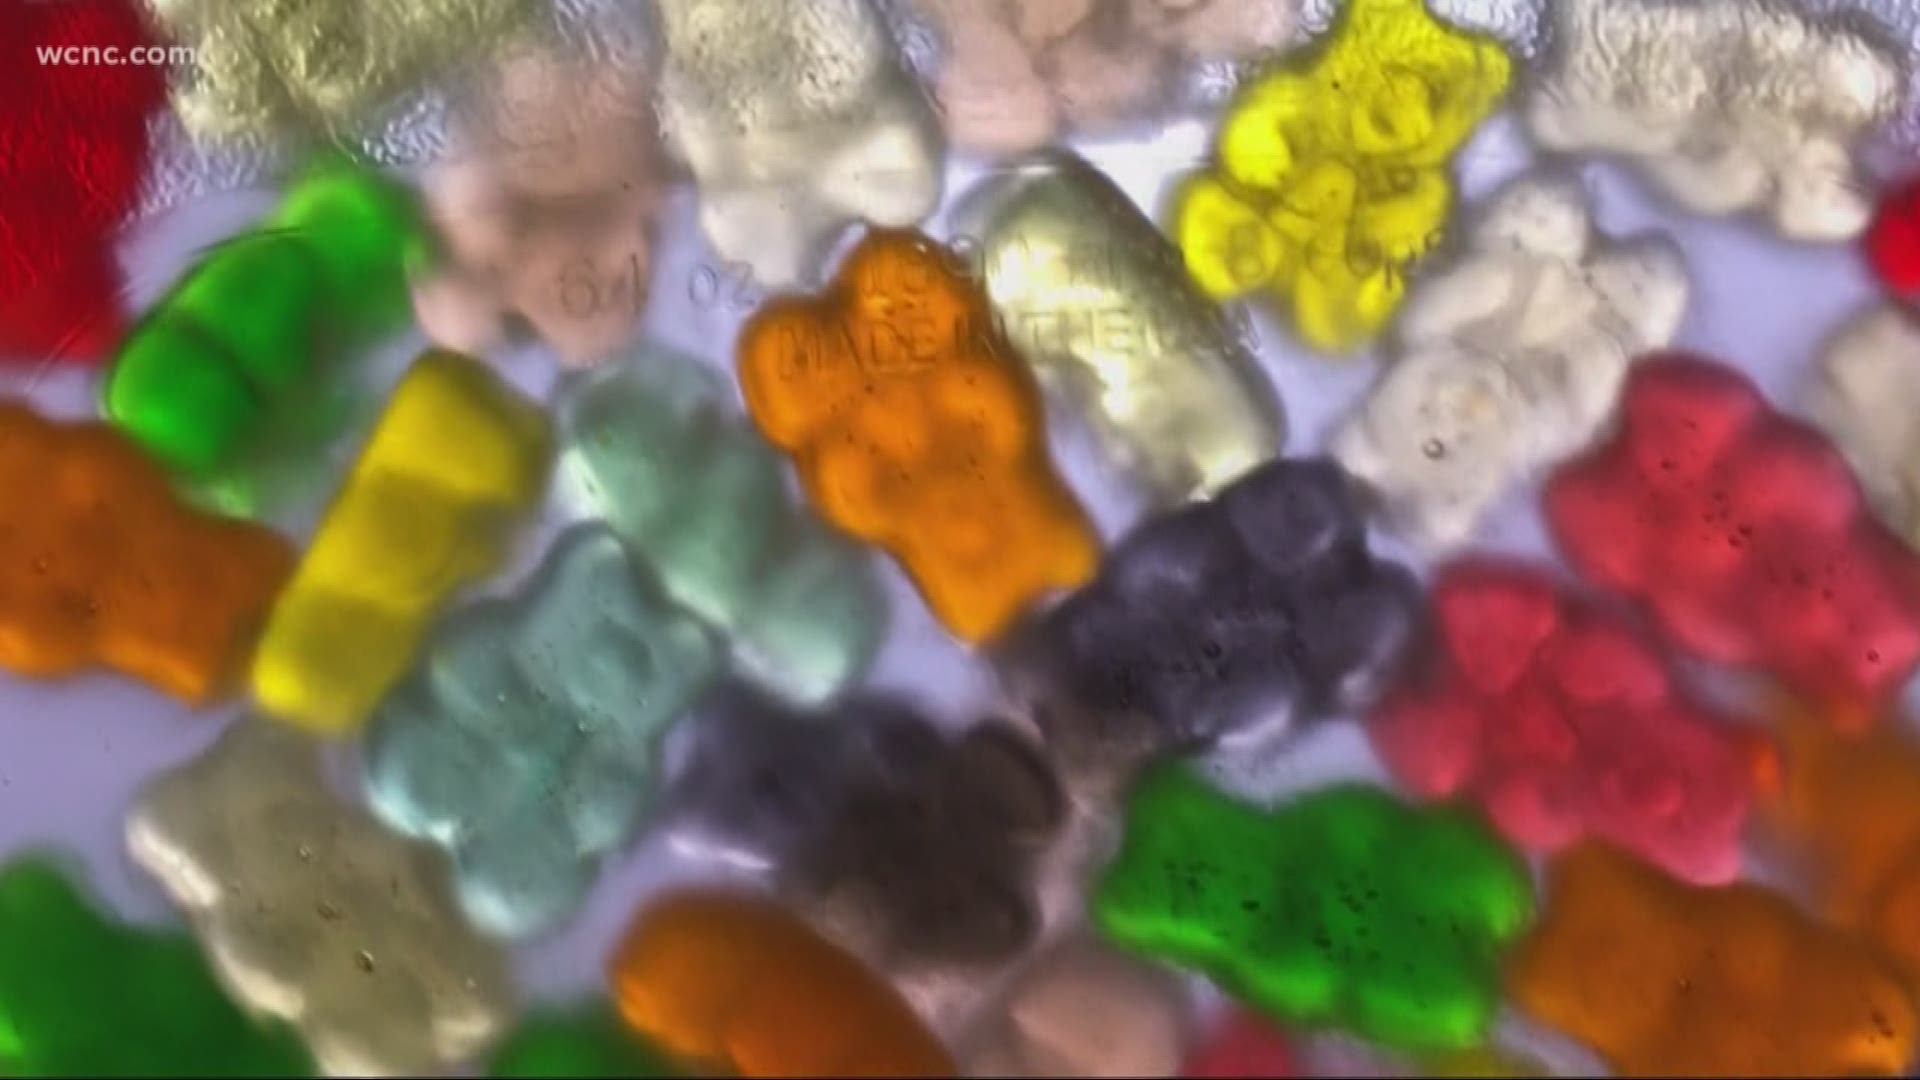 Police warning parents about drug-laced candy in SC